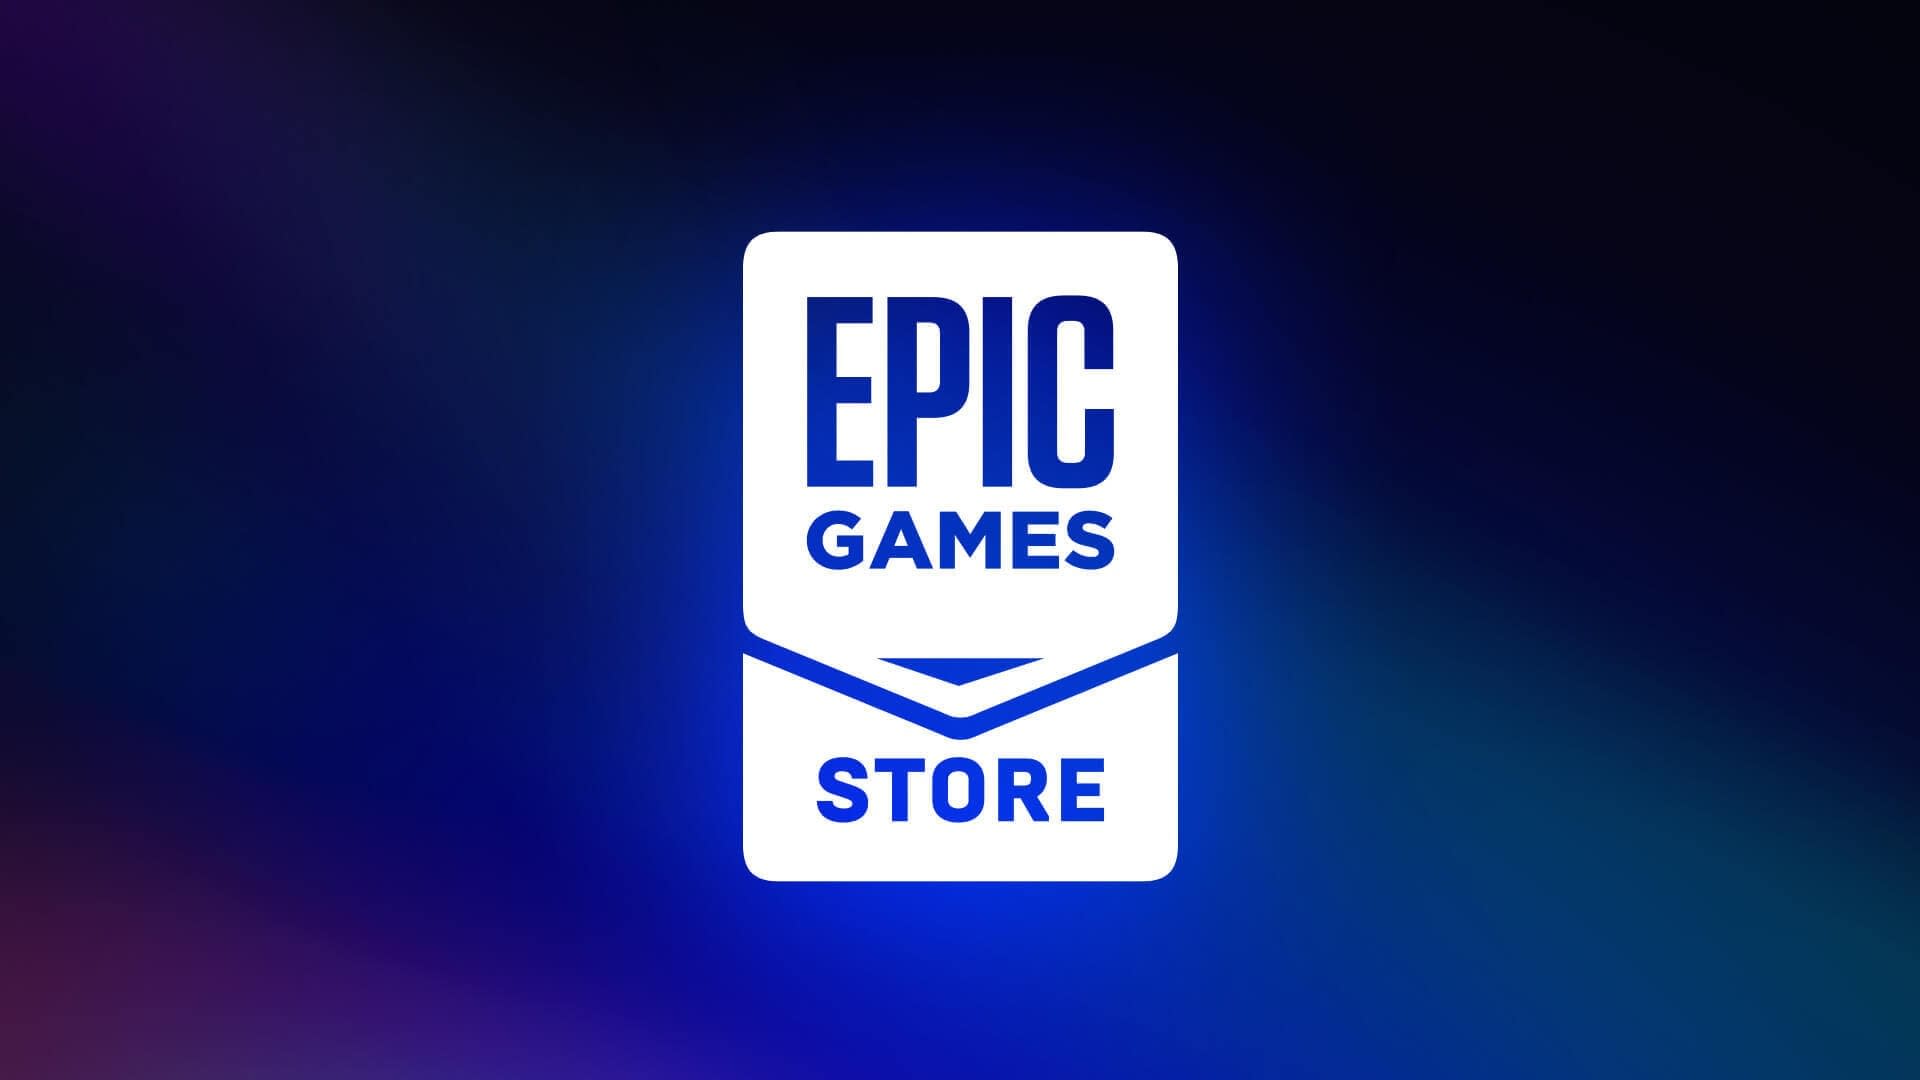 Note that Epic Games Add 448 Tl Free 3 Game to Library!